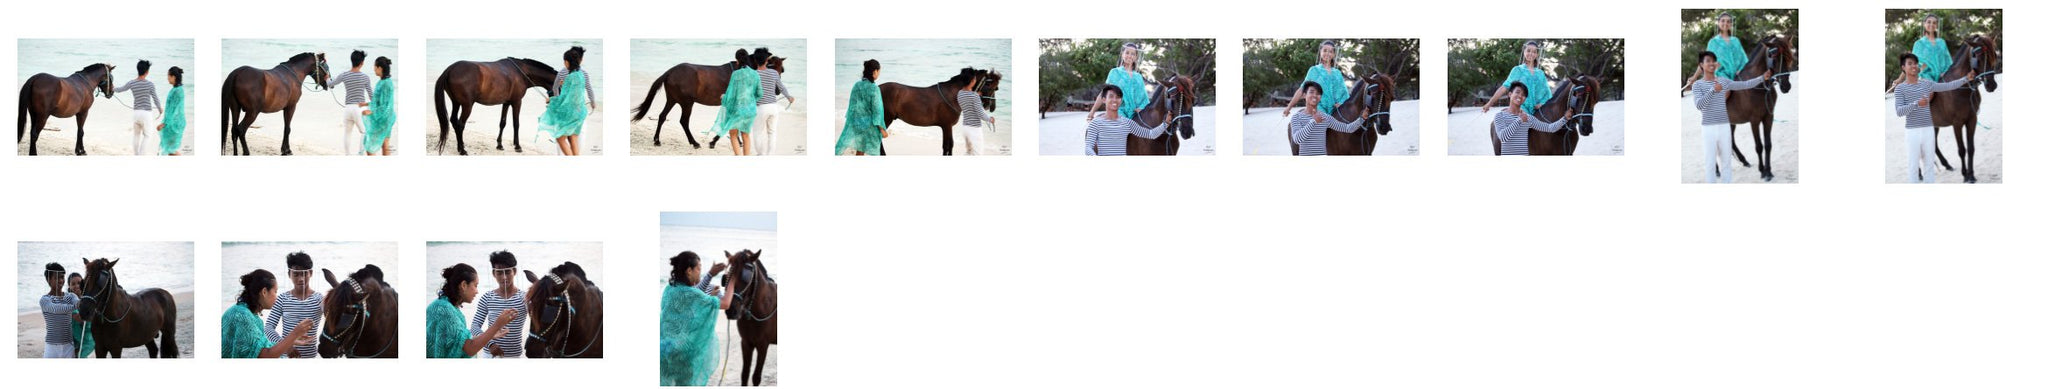 Diah in Turquoise Cloth Riding Bareback on Brown Pony - Riding.Vision